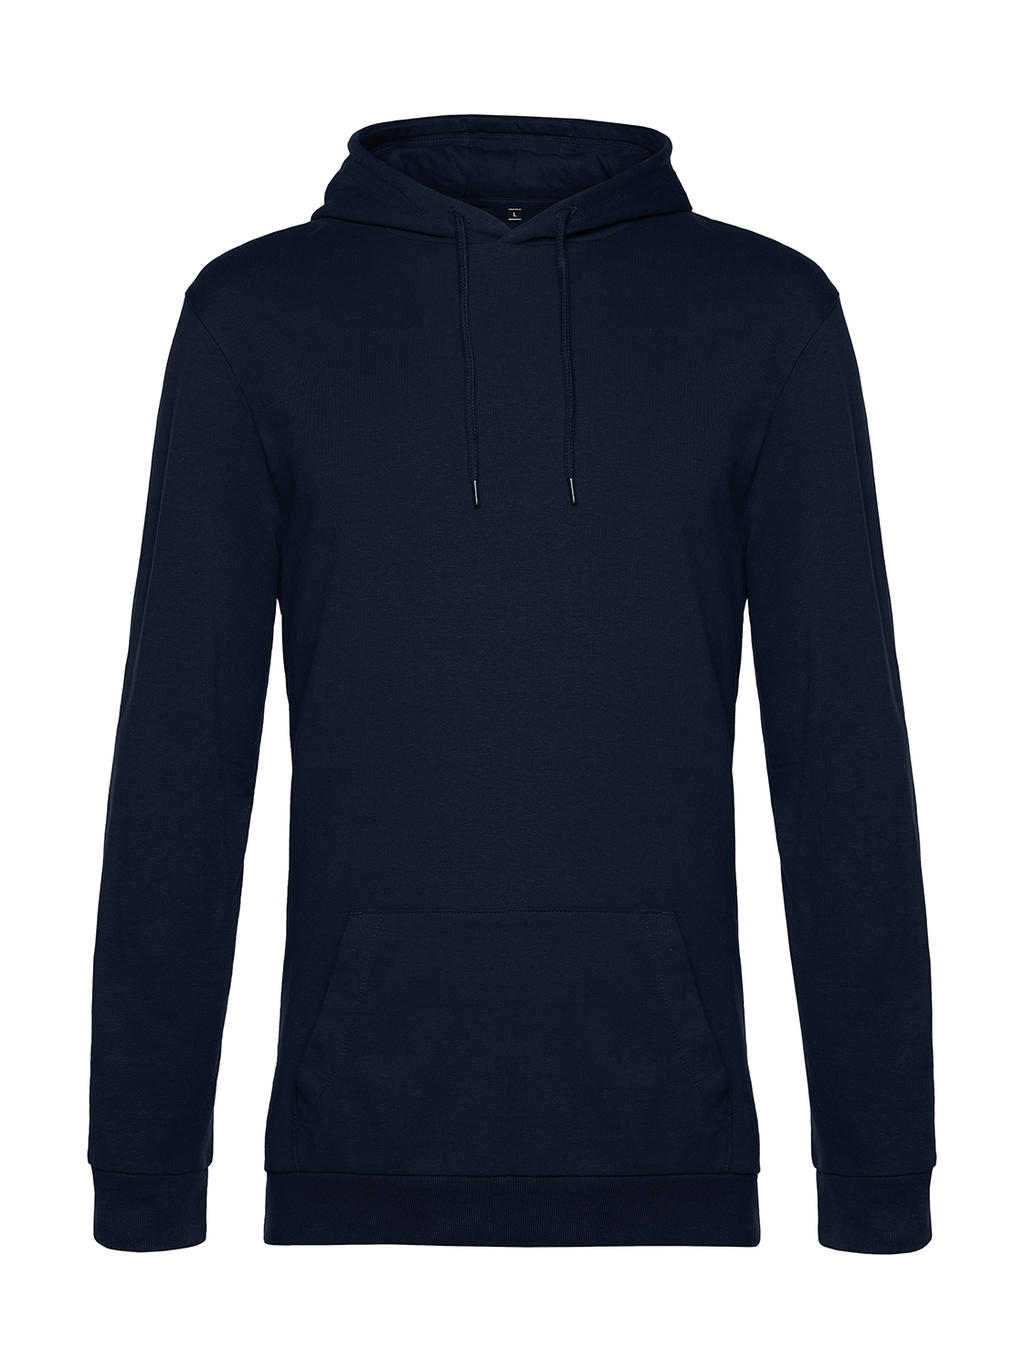 Mikina s kapucňou #Hoodie French Terry - navy blue